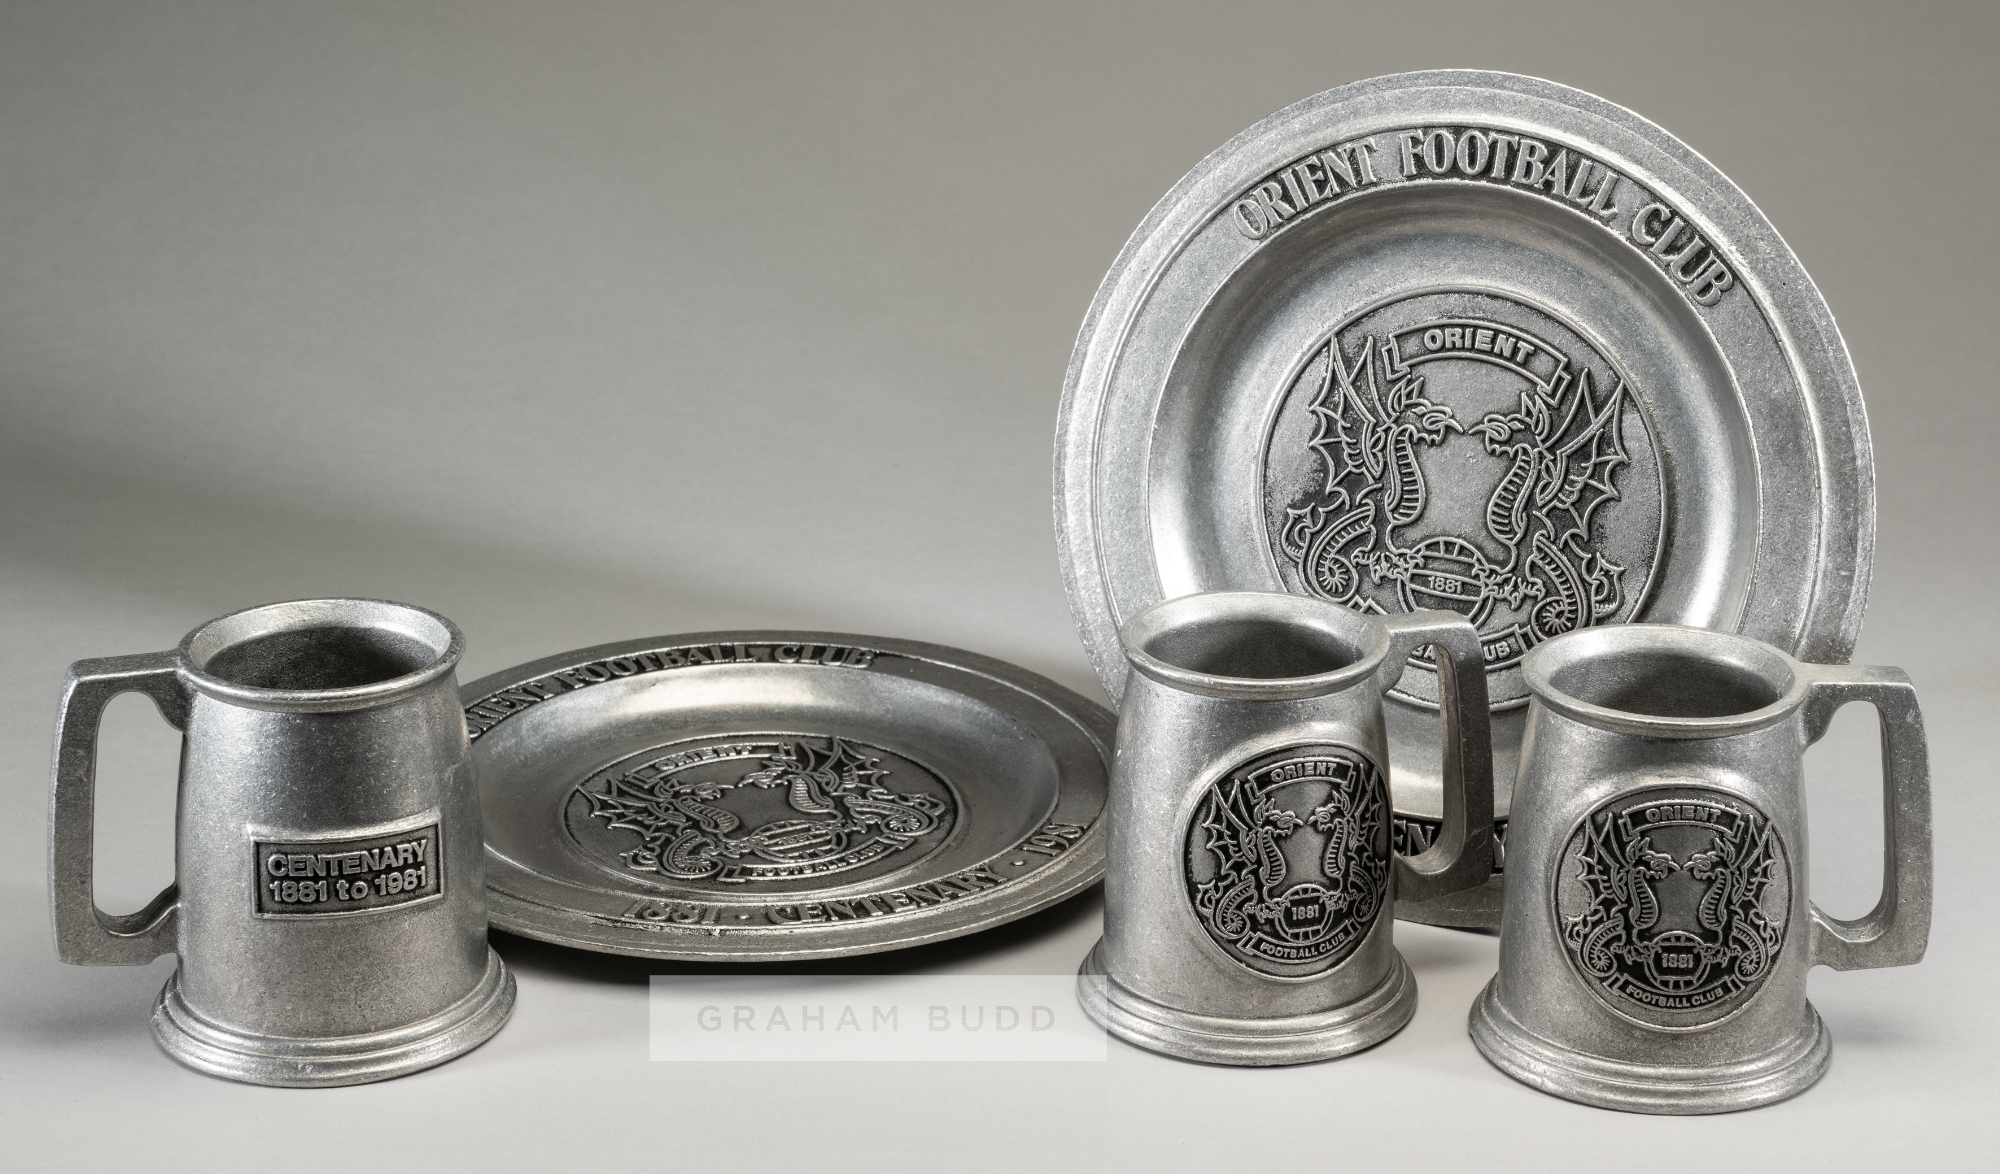 Orient FC Centenary 1881-1981 pewter plates and tankards,  each bearing ORIENT FOOTBALL CLUB 1881